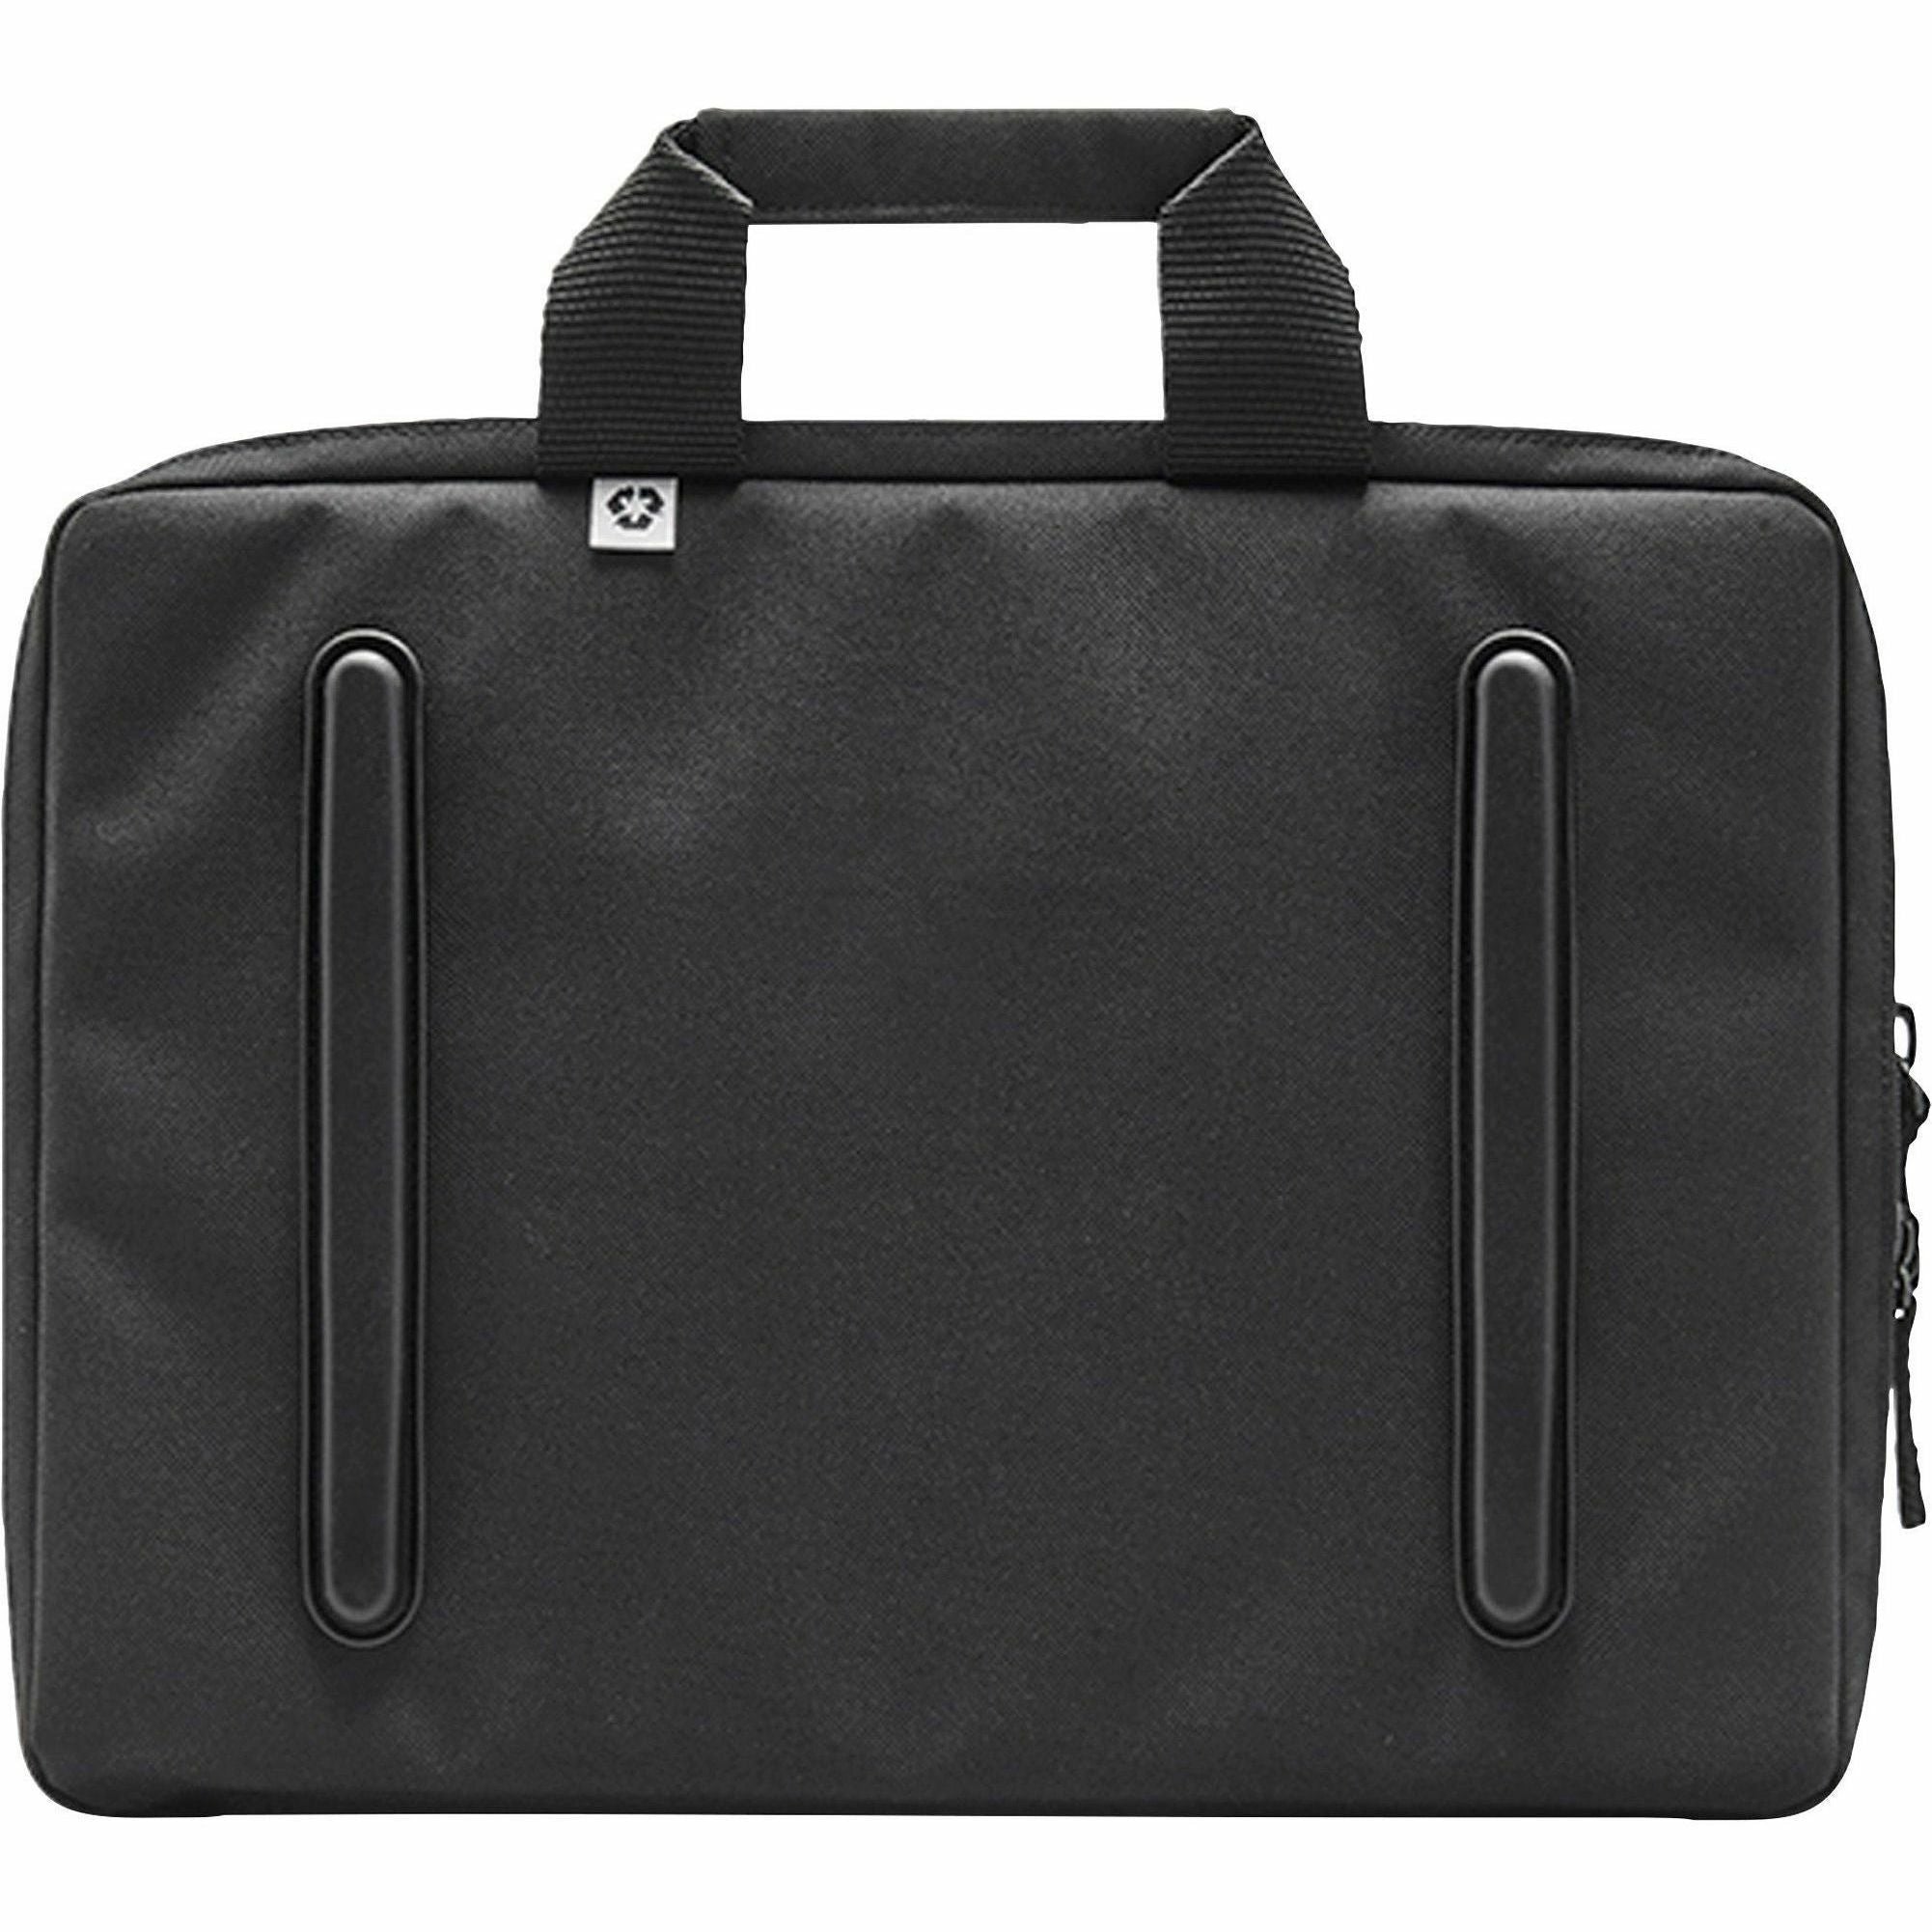 solo-carrying-case-for-116-chromebook-notebook-black-drop-resistant-bacterial-resistant-water-resistant-fabric-body-handle-1-each_uslpro1534 - 2